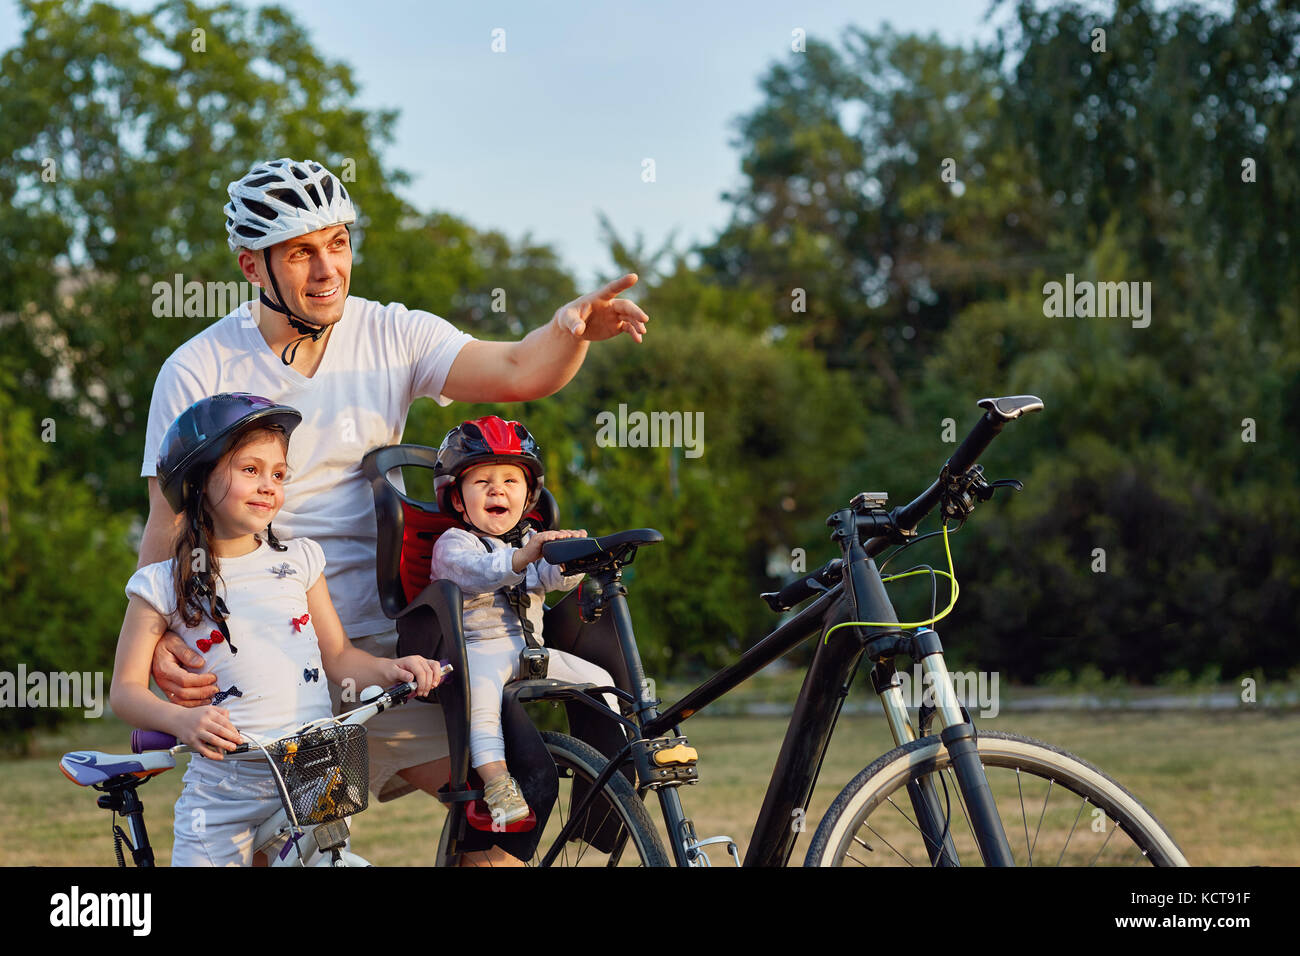 Family in park, riding bicycles, looking at camera Stock Photo